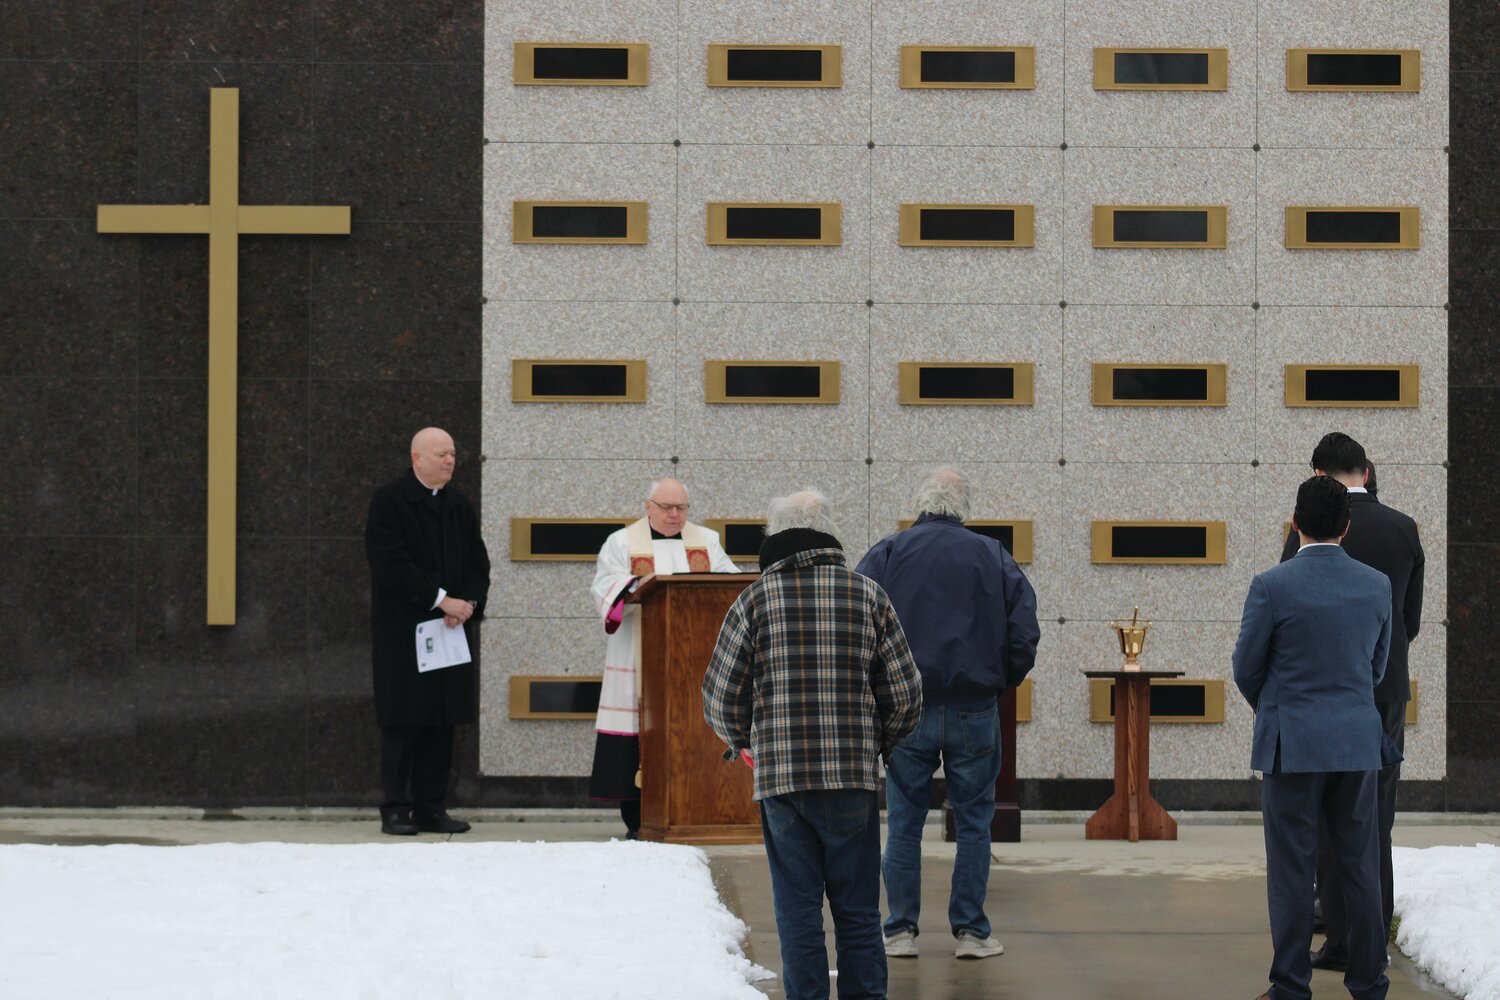 Reverend Msgr. Raymond B. Bastia and Father William J. Ledoux lead a dedication service for the Mausoleum of the Holy Cross at St. Ann’s Cemetery, Cranston.